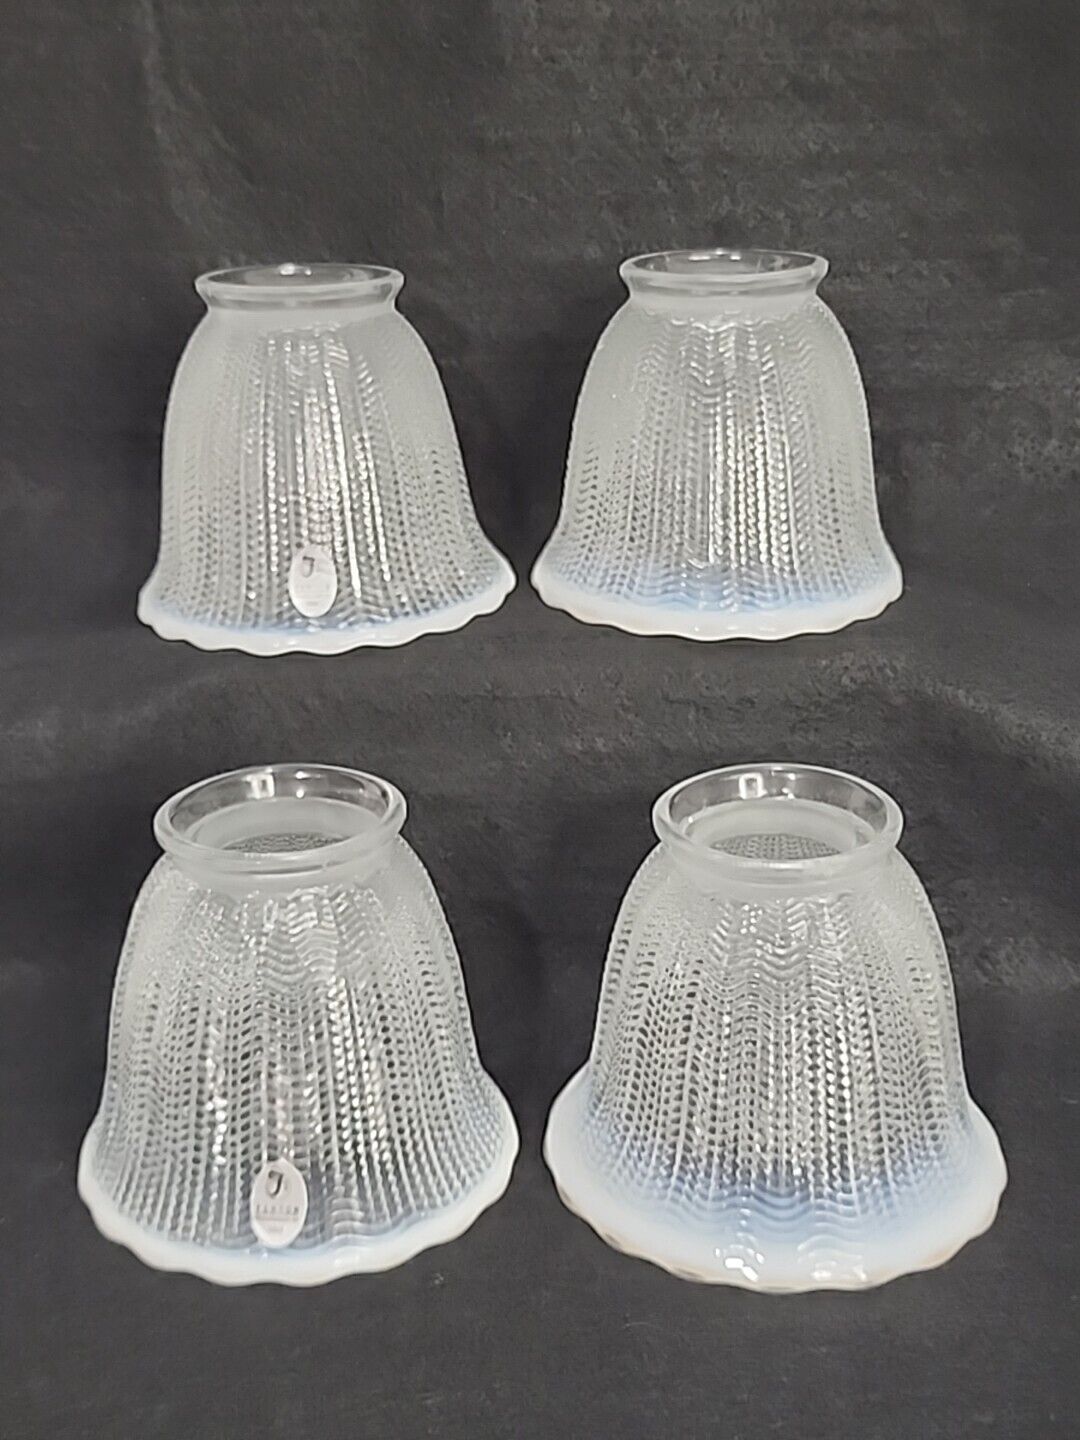 4 Fenton Replacement Glass Lamp Shades Clear Rib Opalescent Light Blue to White